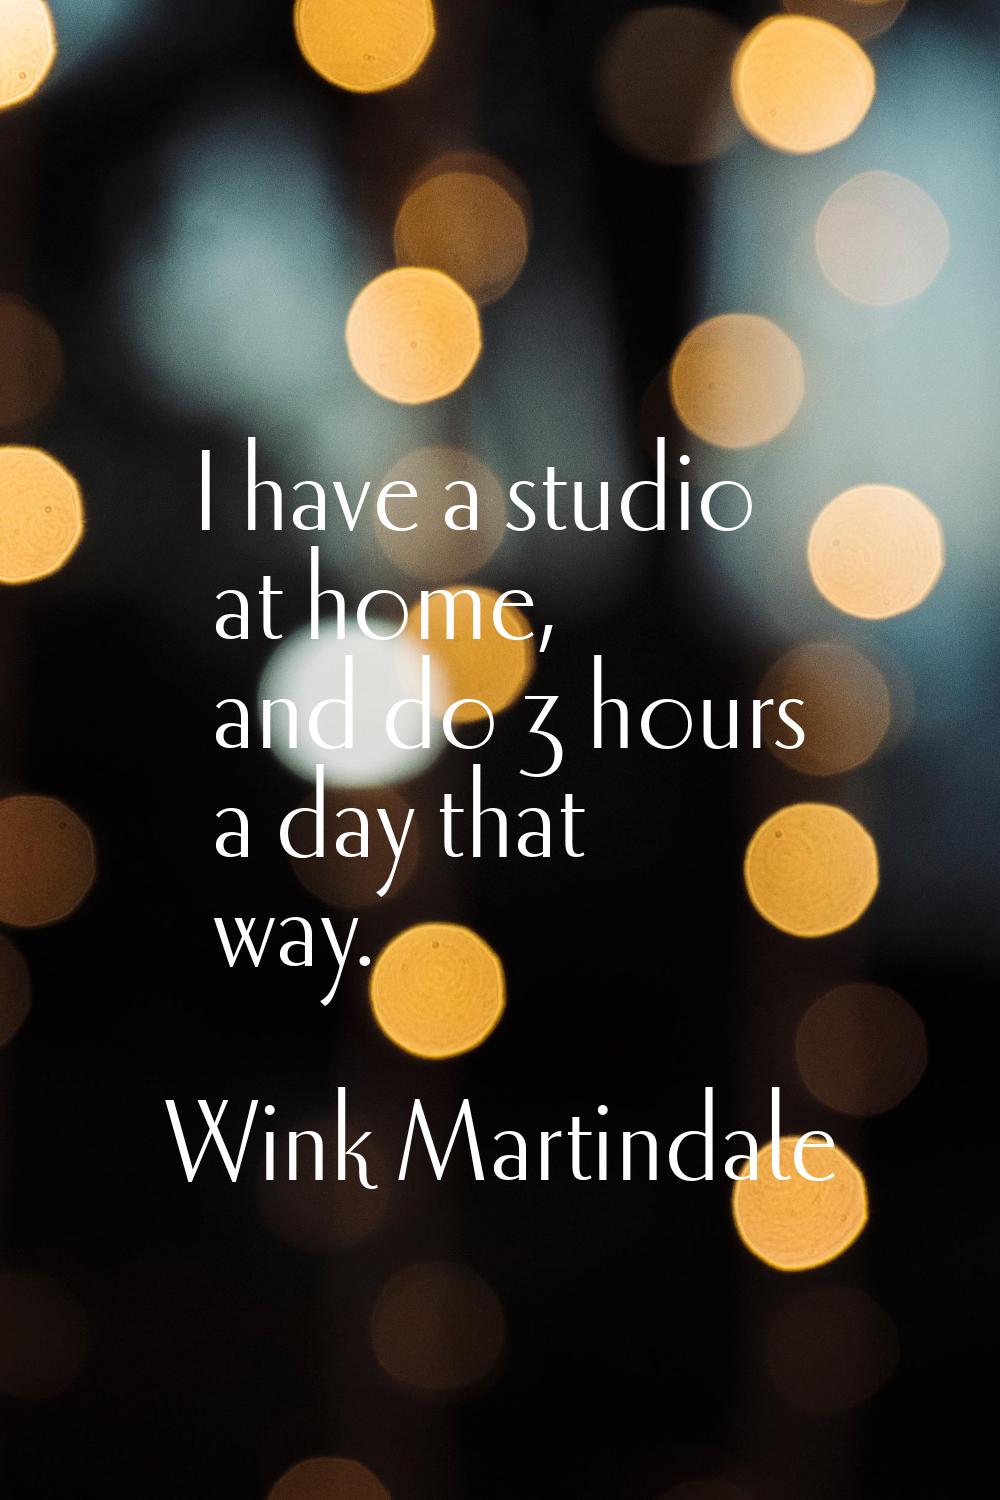 I have a studio at home, and do 3 hours a day that way.